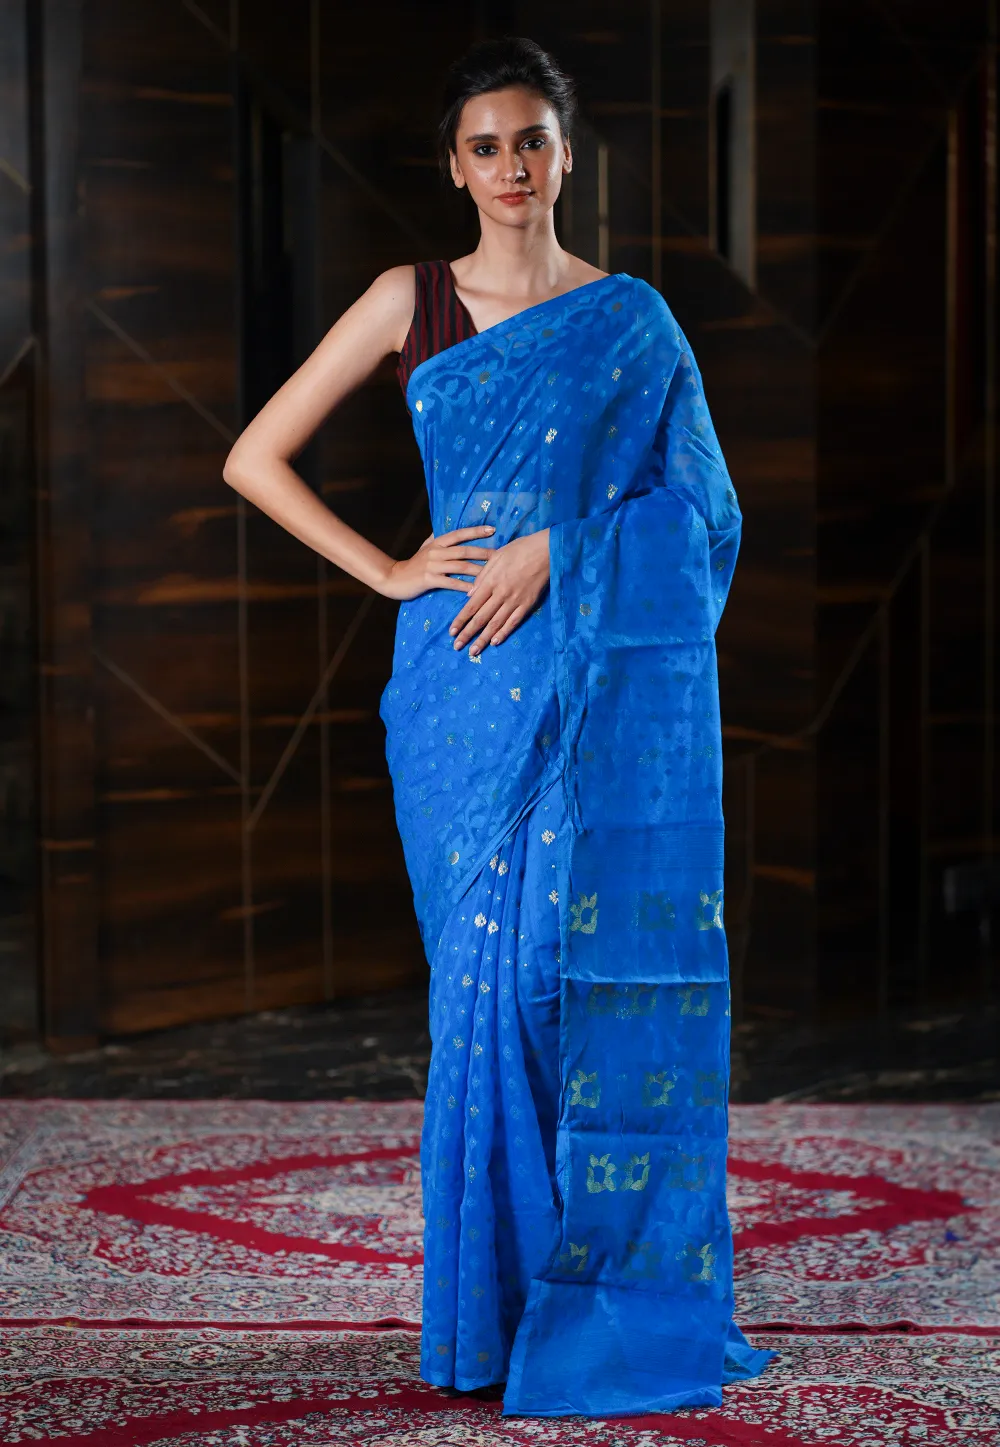 blue jamdani saree with self and gold floral woven motifs 5f463e77c8384 1598439031